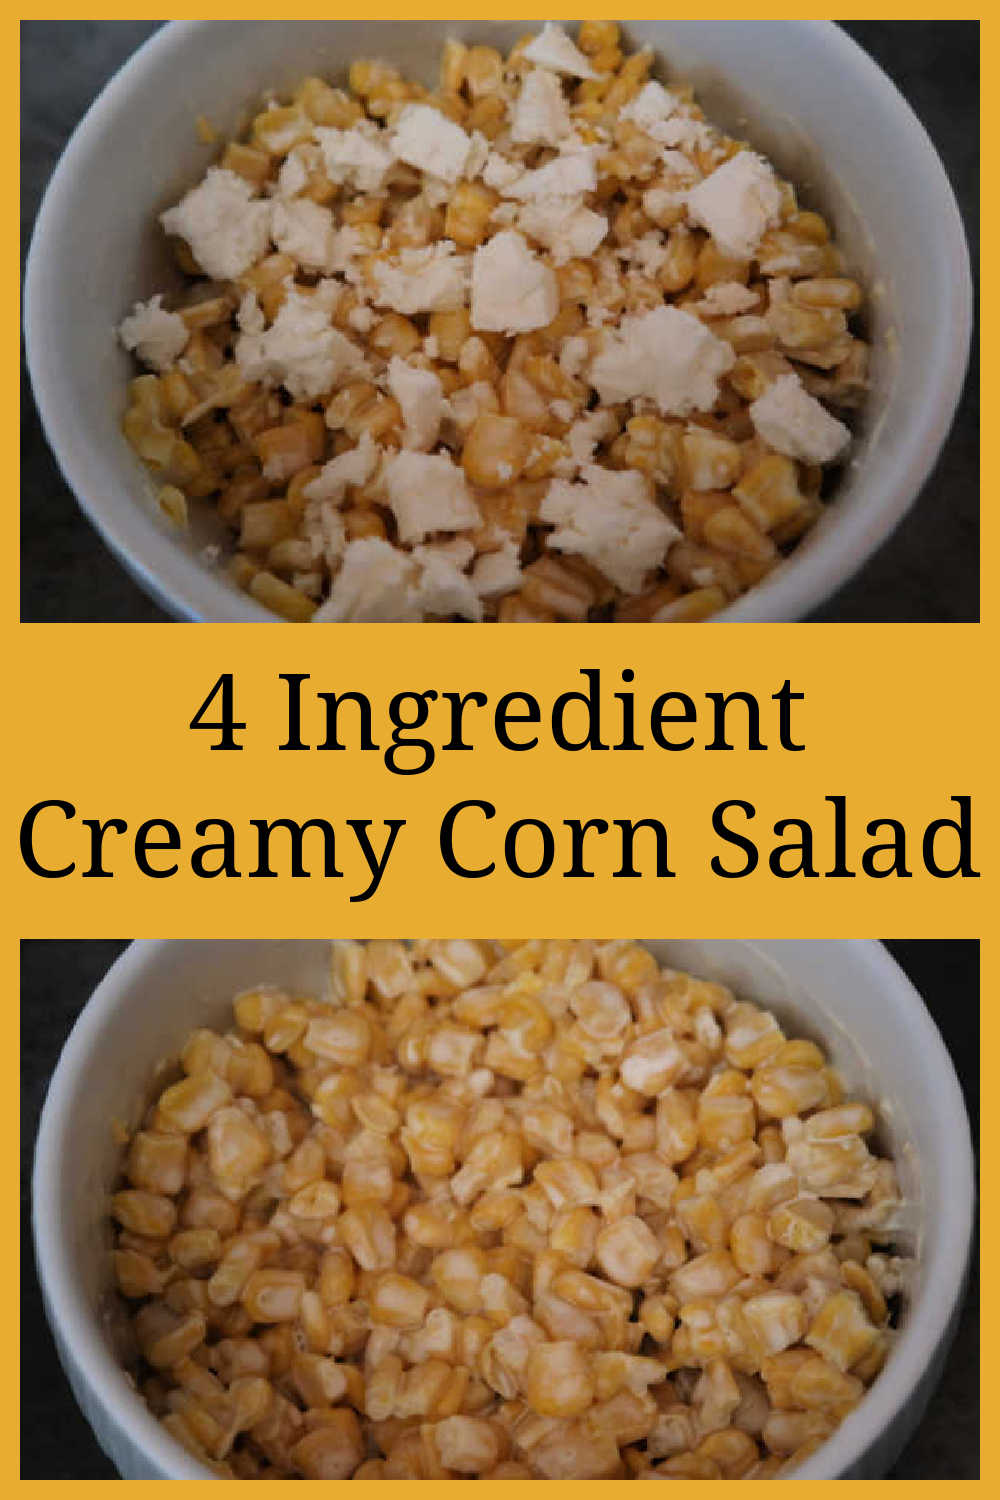 Creamy Corn Salad Recipe - How to make the best cheap & easy 4 ingredient summer salad with frozen corn and a quick creamy sauce - with the video tutorial.